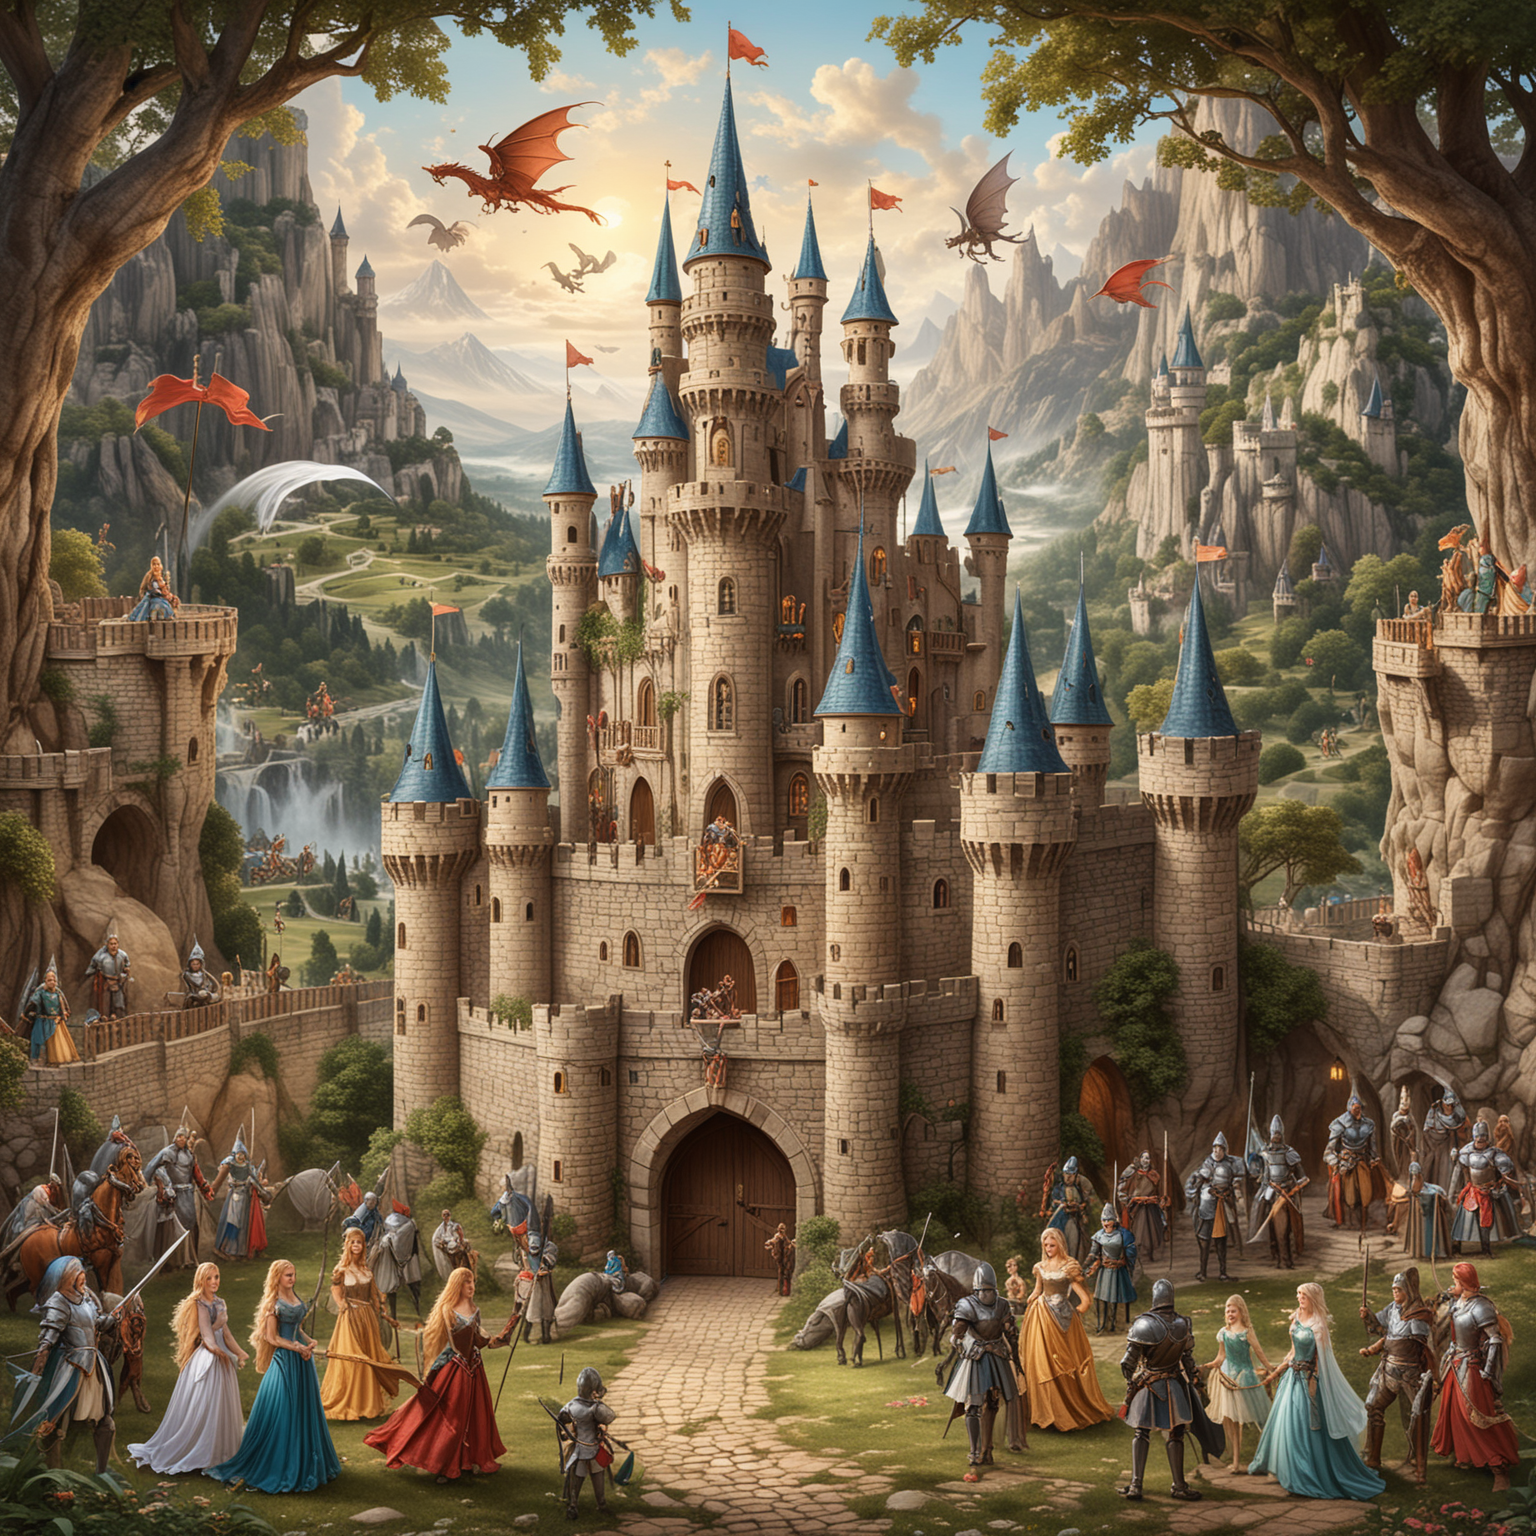 Fantasy Fairy Tale Castle with Knights Dragons and Princesses